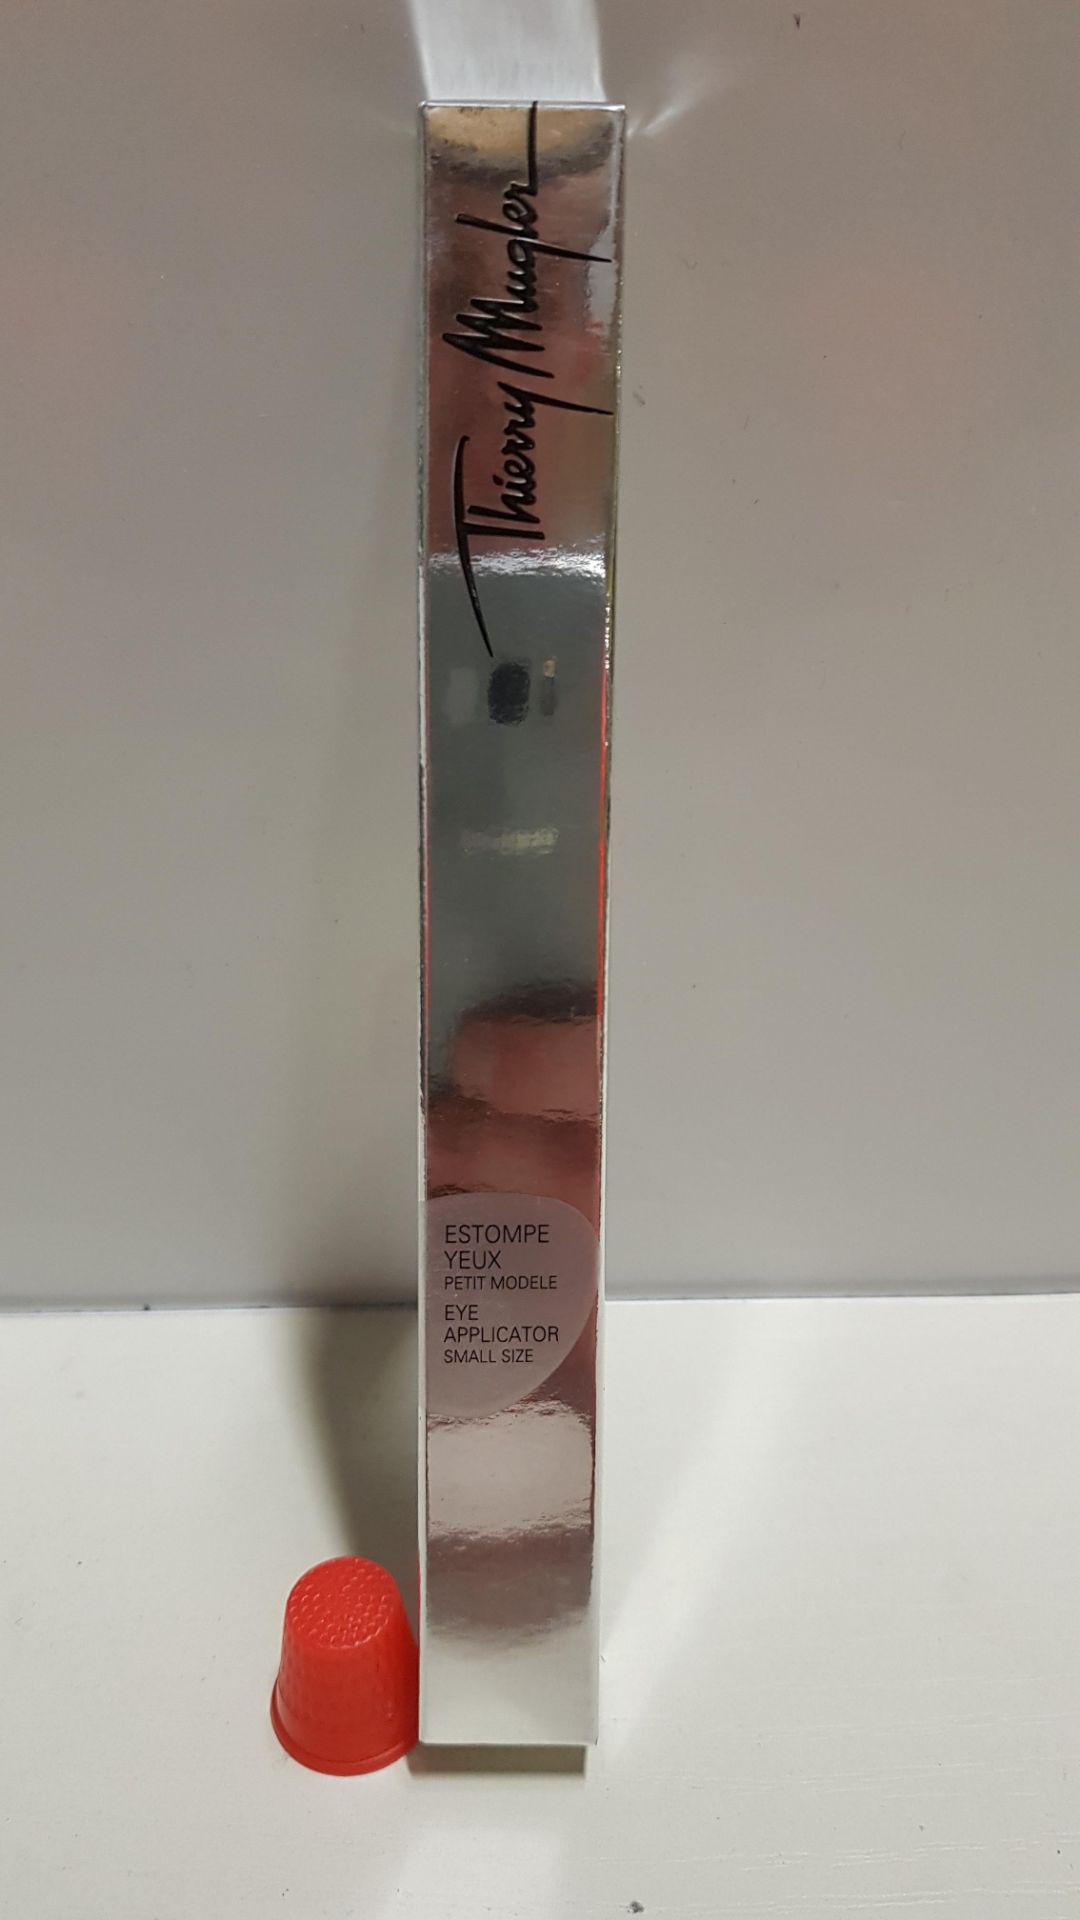 46 X BRAND NEW THIERRY MUGLER EYE APPLICATOR IN SIZE SMALL AND LARGE (NOTE: BOXES SLIGHTLY DAMAGED)